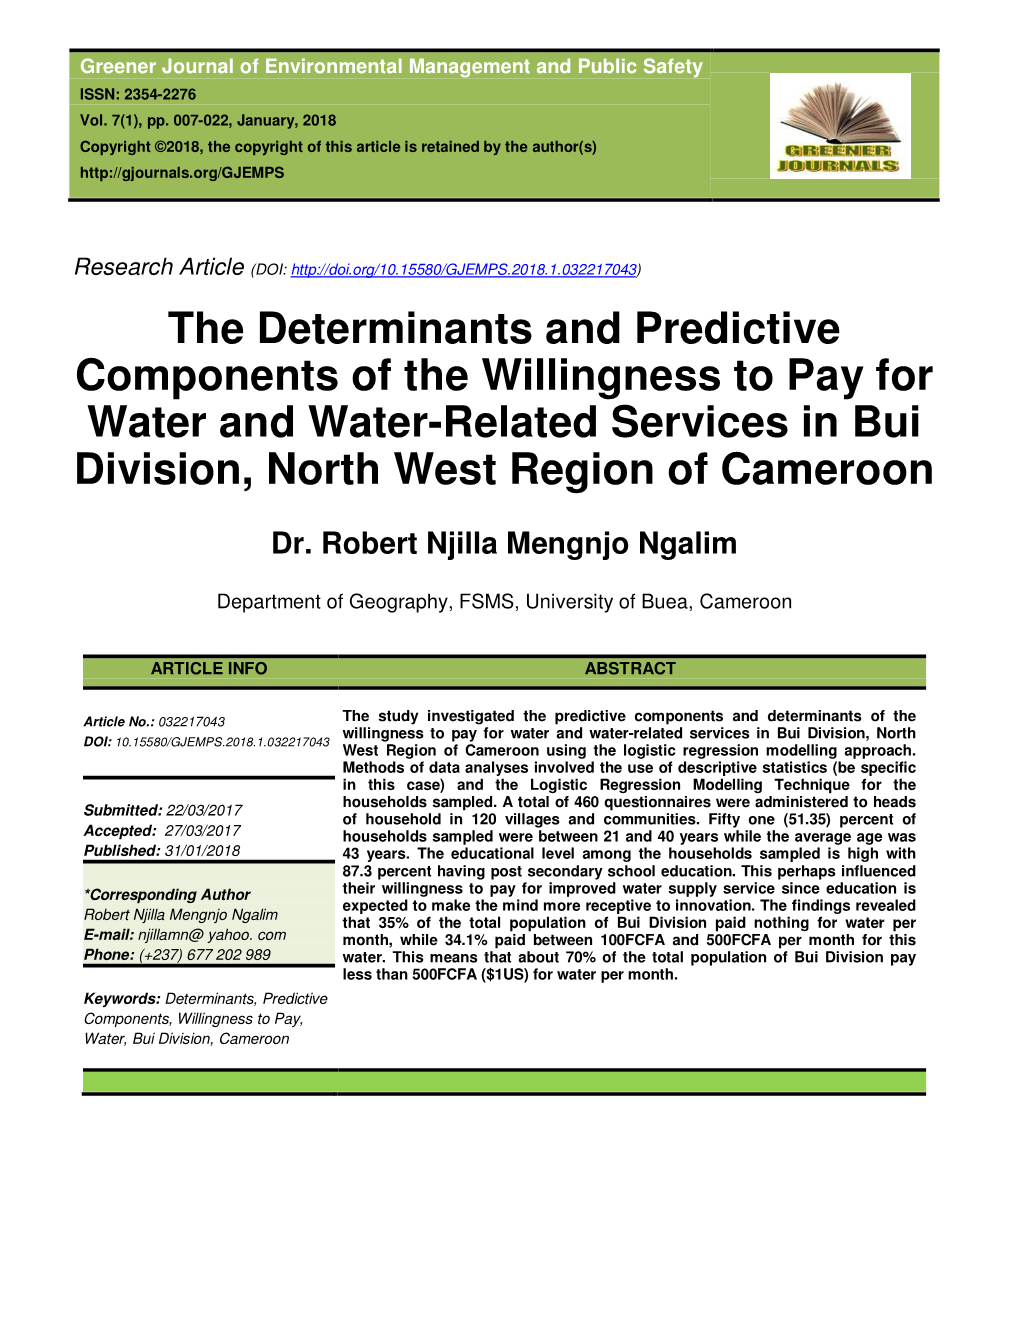 The Determinants and Predictive Components of the Willingness to Pay for Water and Water-Related Services in Bui Division, North West Region of Cameroon